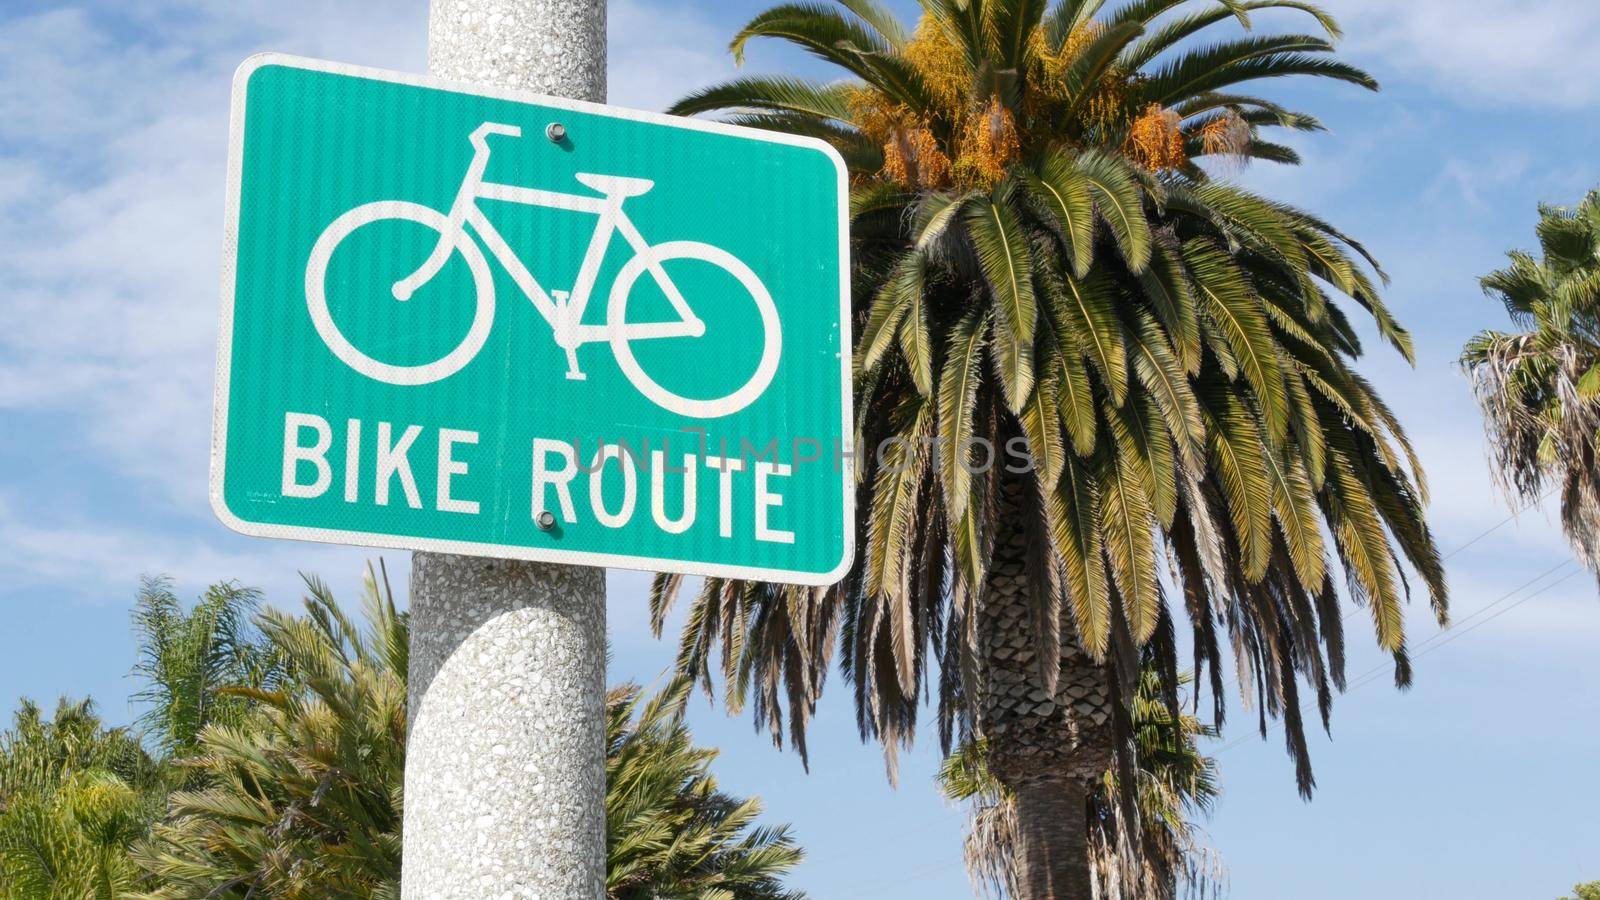 Bike Route green road sign in California, USA. Bicycle lane singpost. Bikeway in Oceanside pacific tourist resort. Cycleway signboard and palm. Healthy lifestyle, recreation and safety cycling symbol by DogoraSun